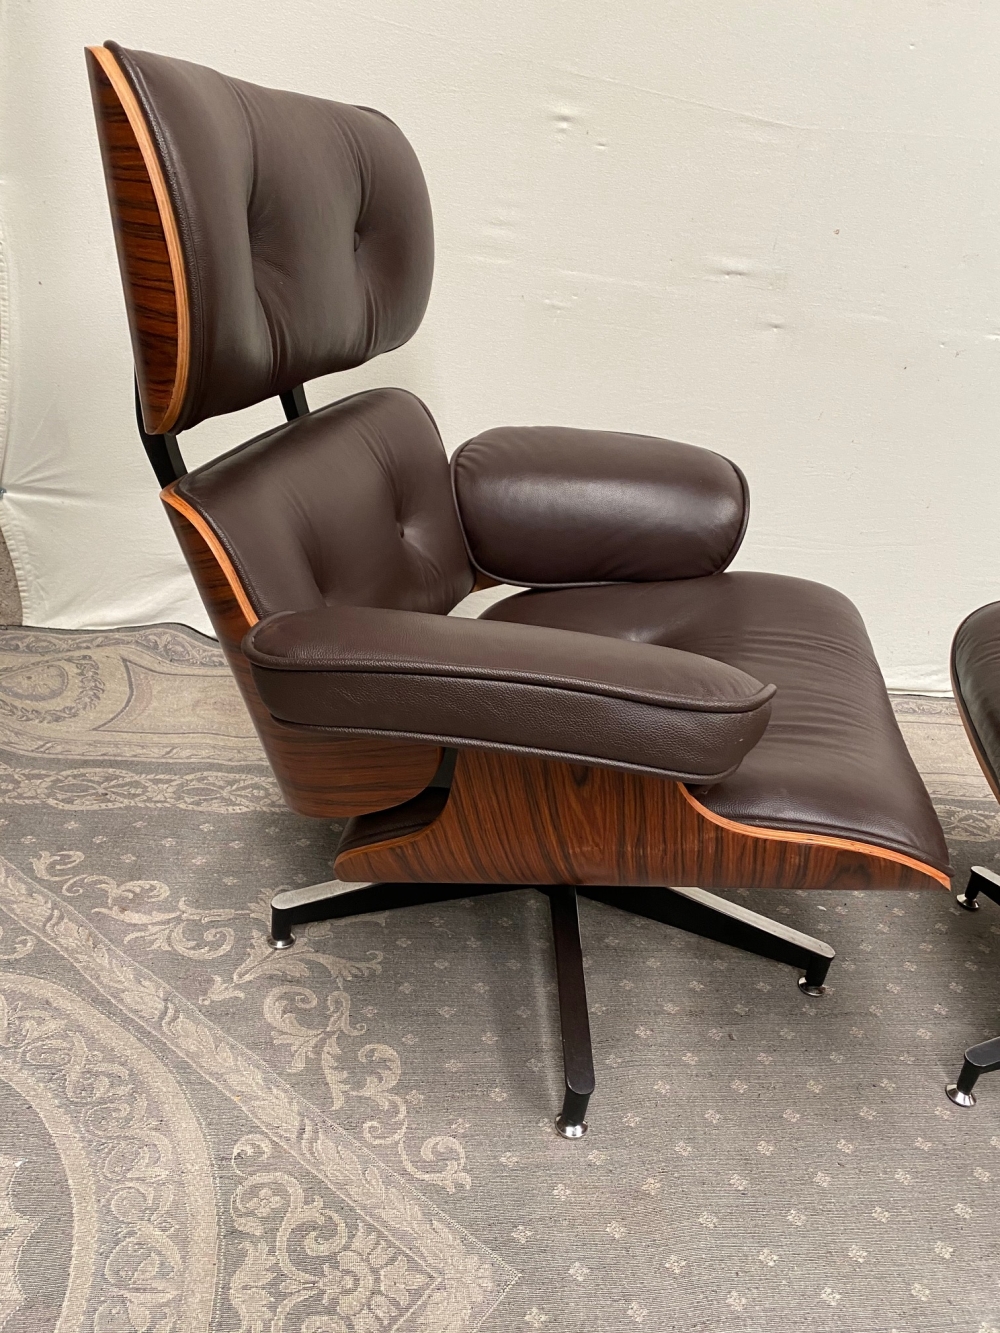 A CONTEMPORARY MID CENTURY MODERN STYLE LEATHER RECLINER CHAIR WITH FOOT STOOL, with rosewood frame - Image 2 of 6